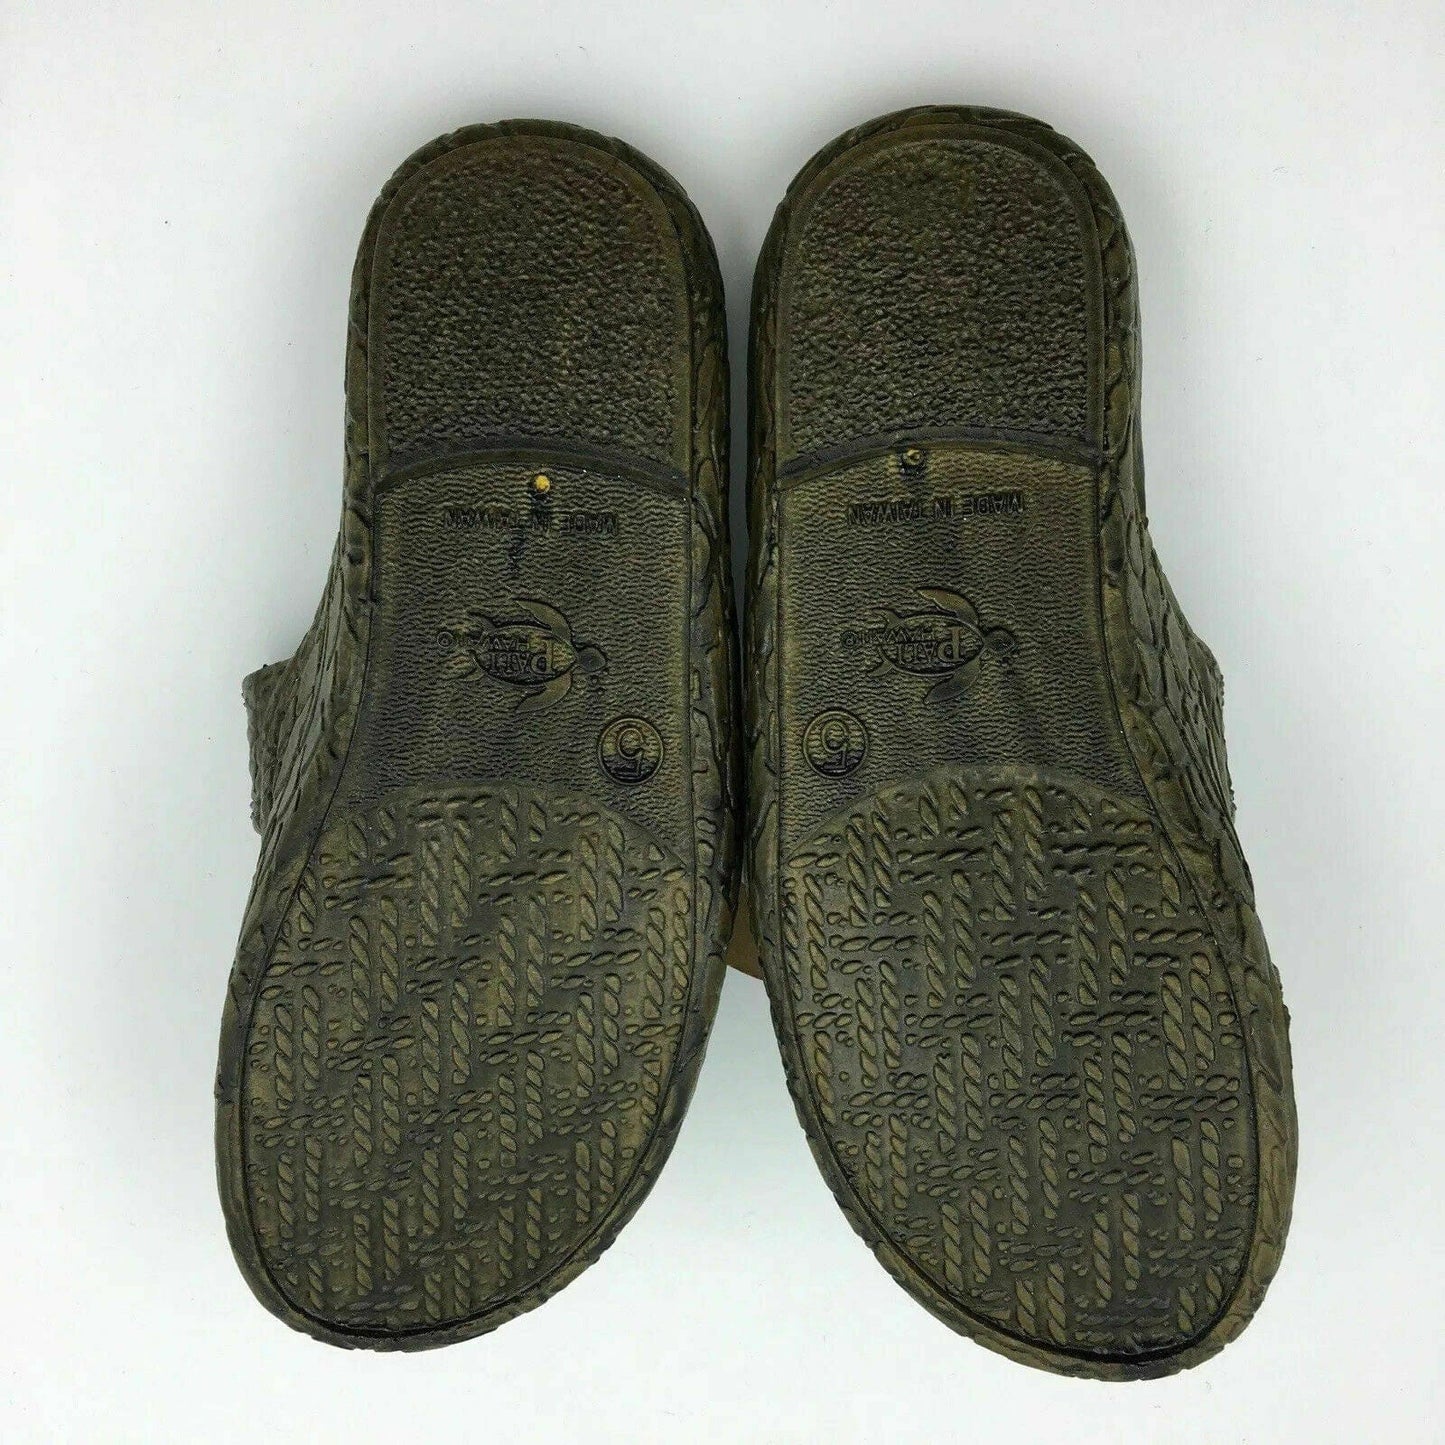 Pali Hawaii Size 5 Brown Rubber Sandals Classic Jandals Slides Shower Shoes